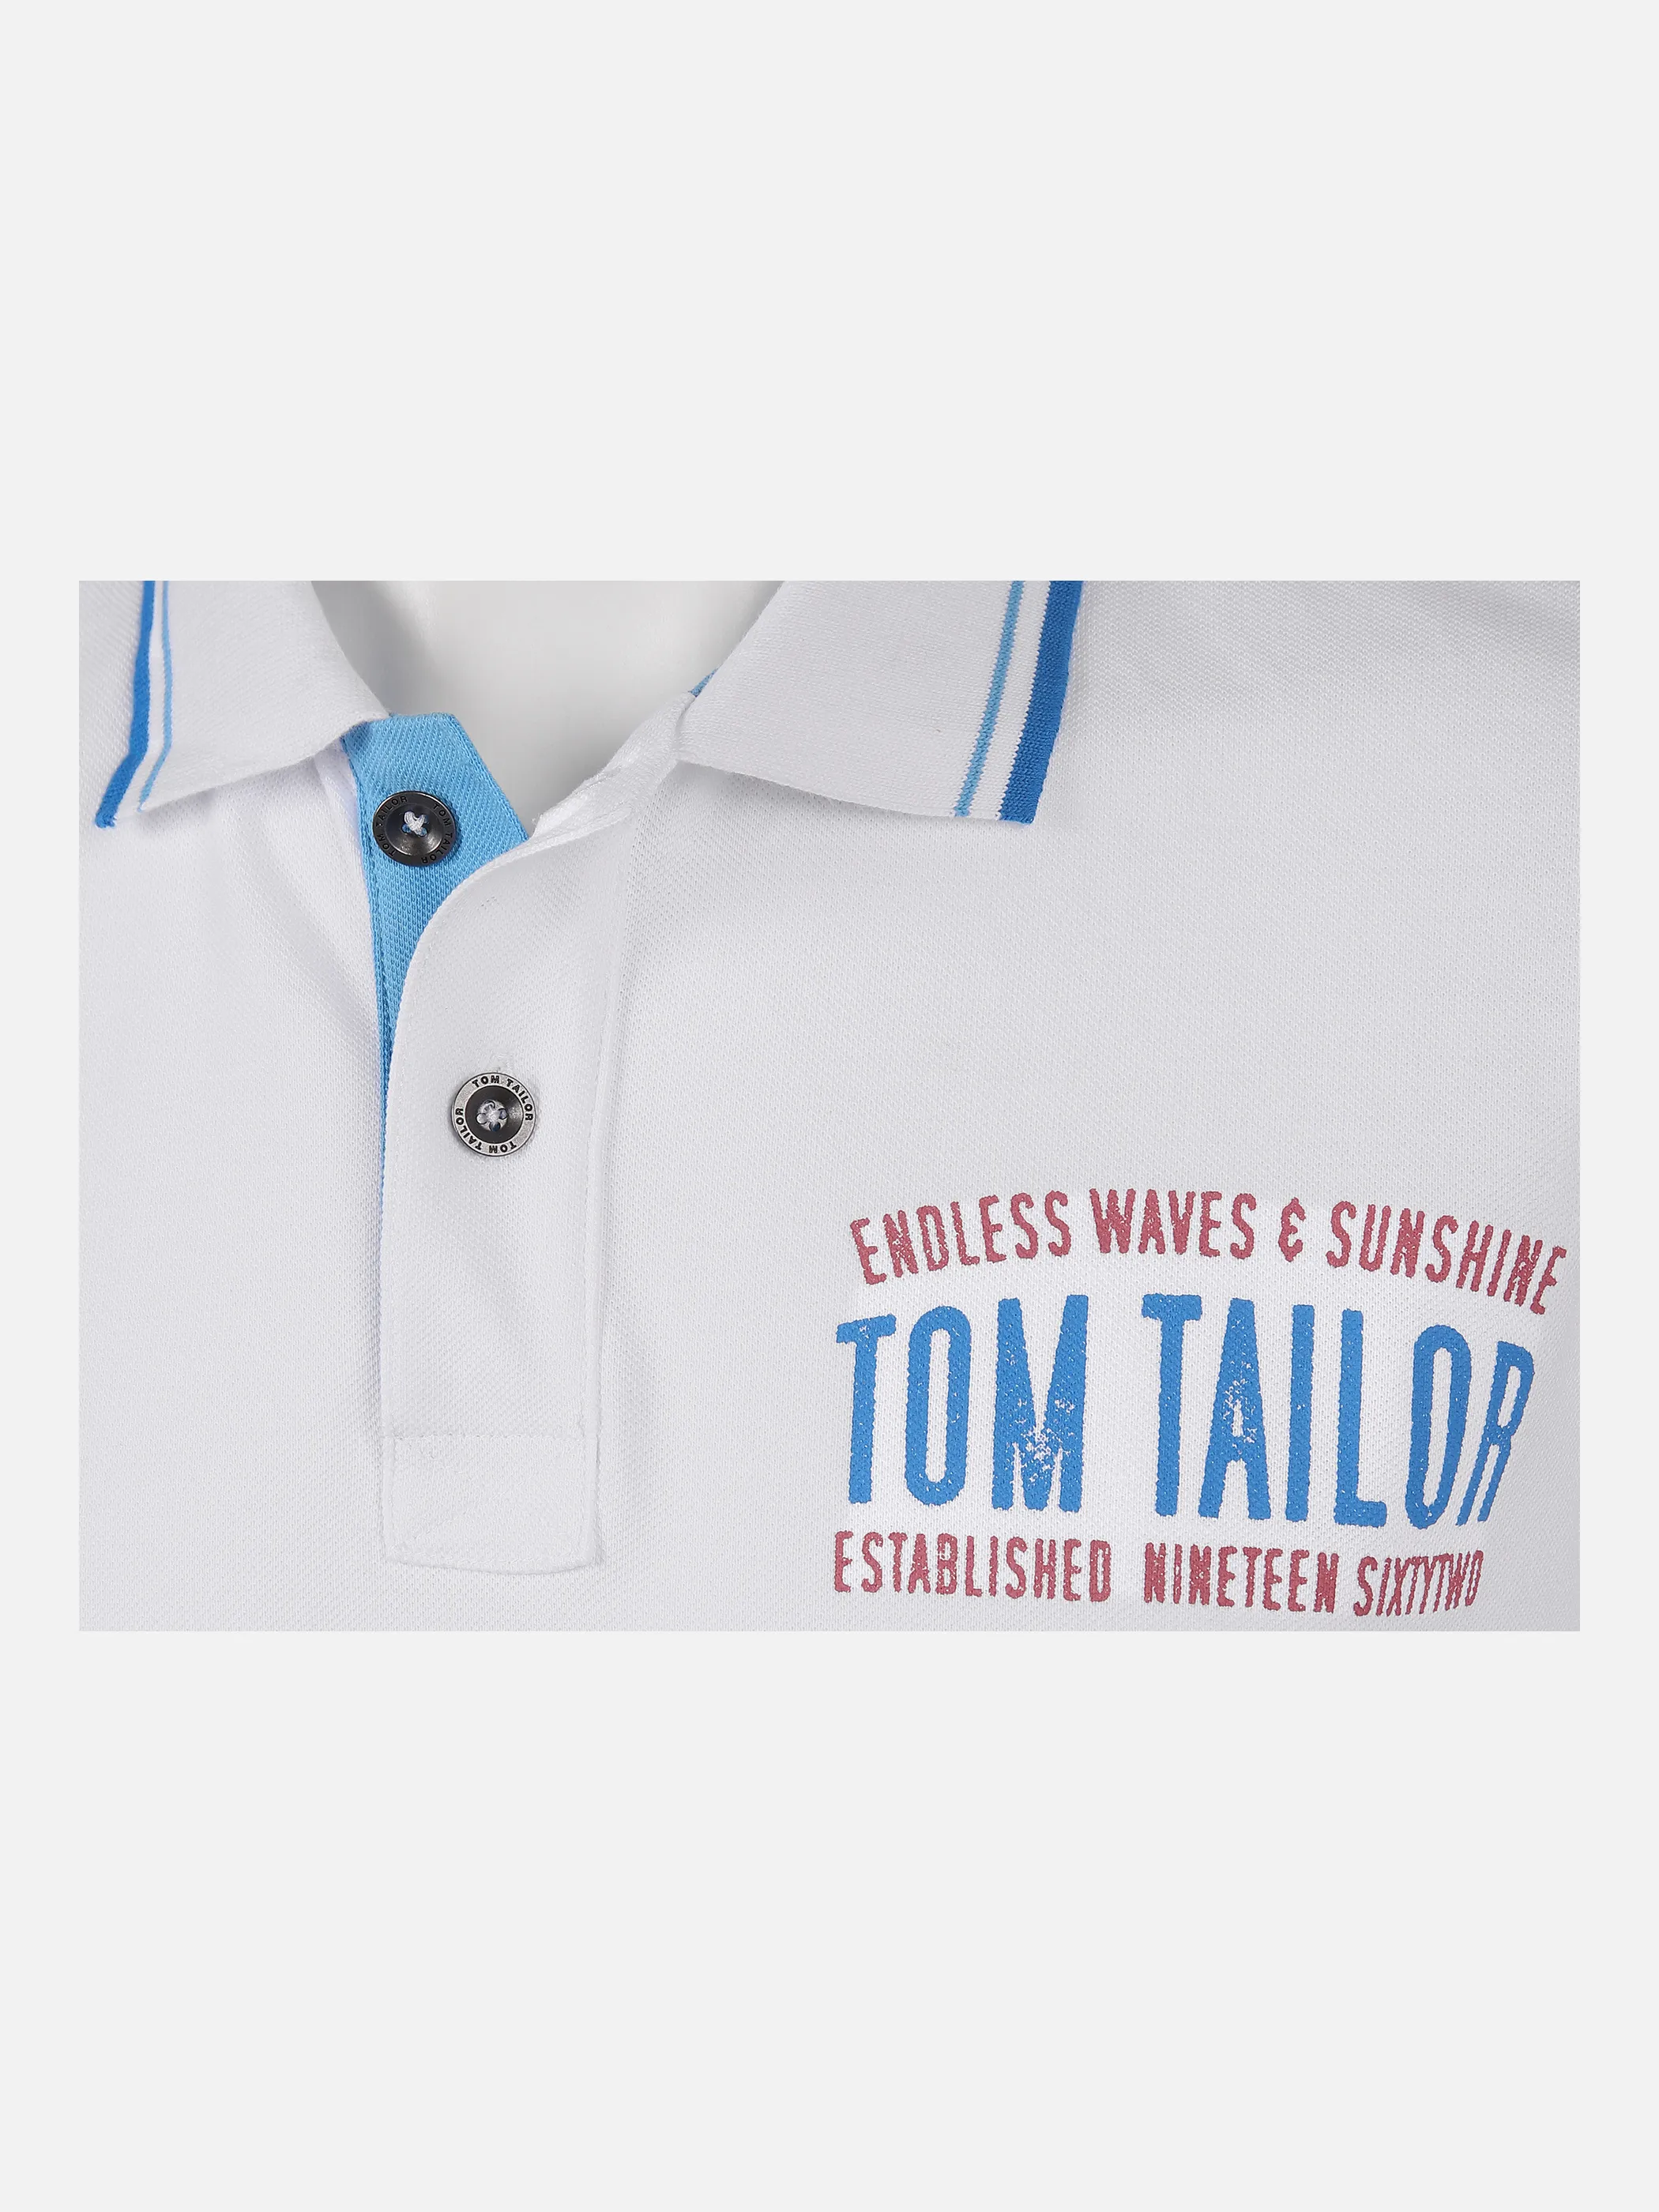 Tom Tailor 1021831 SMU decorated polo Weiß 839892 20000 3